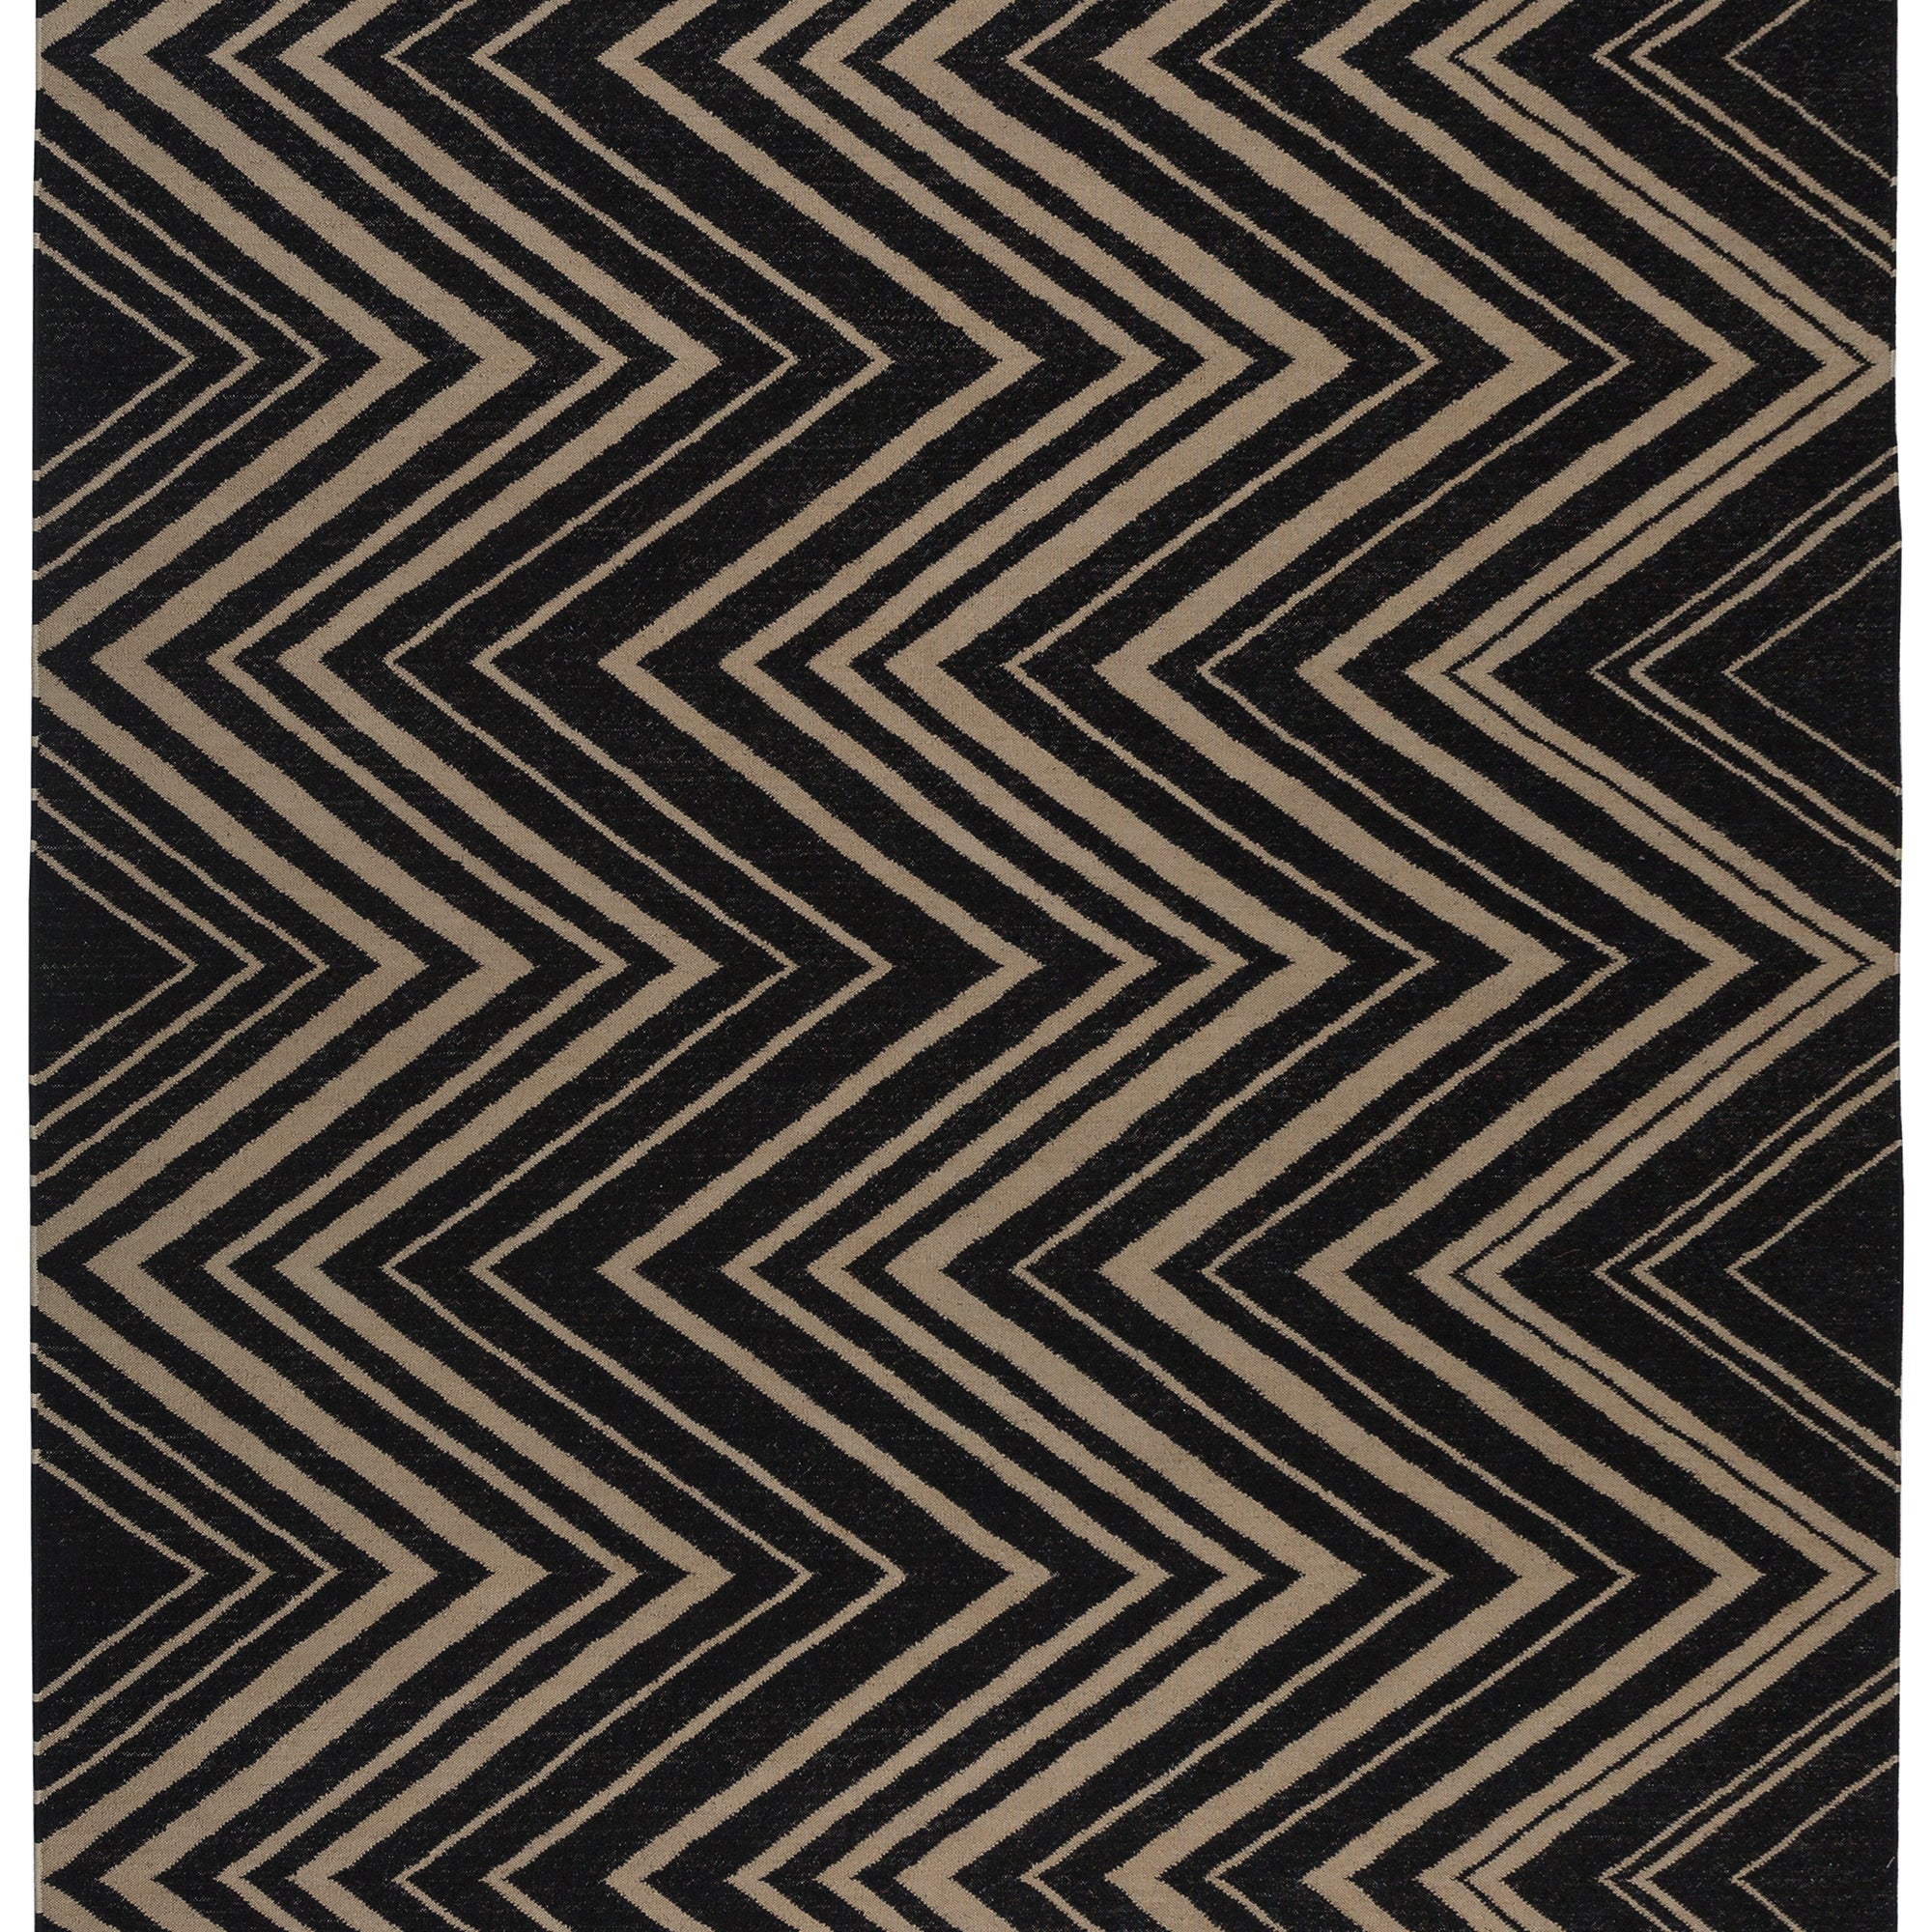 Vertical Zig-Zag Rug in Onyx-Sandstone, a zig zag pattern in mixed widths in black and taupe with a fringed edge. 